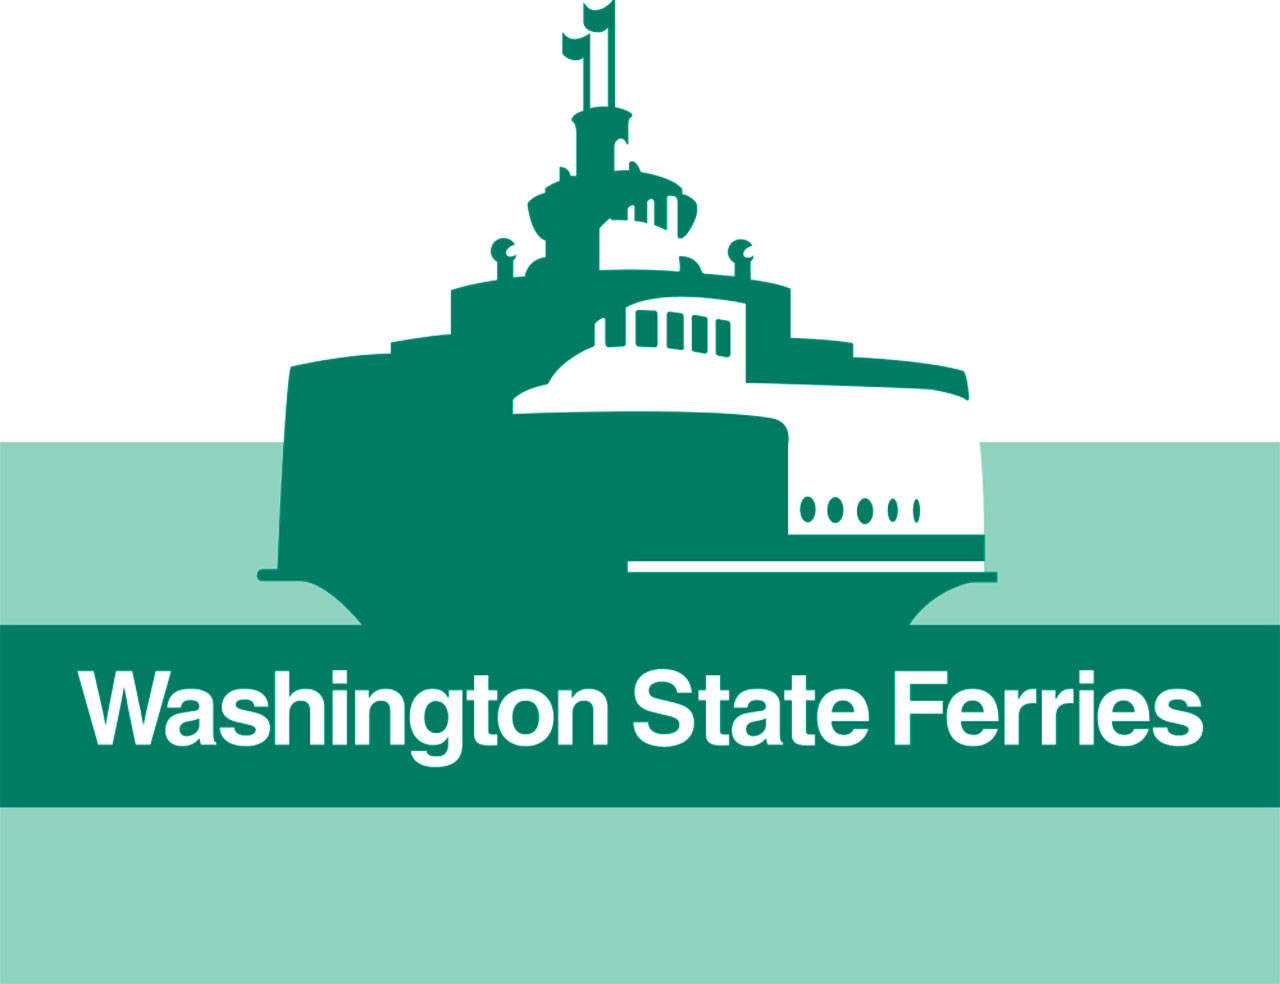 Nearly 25 million set sail on state ferries in 2018